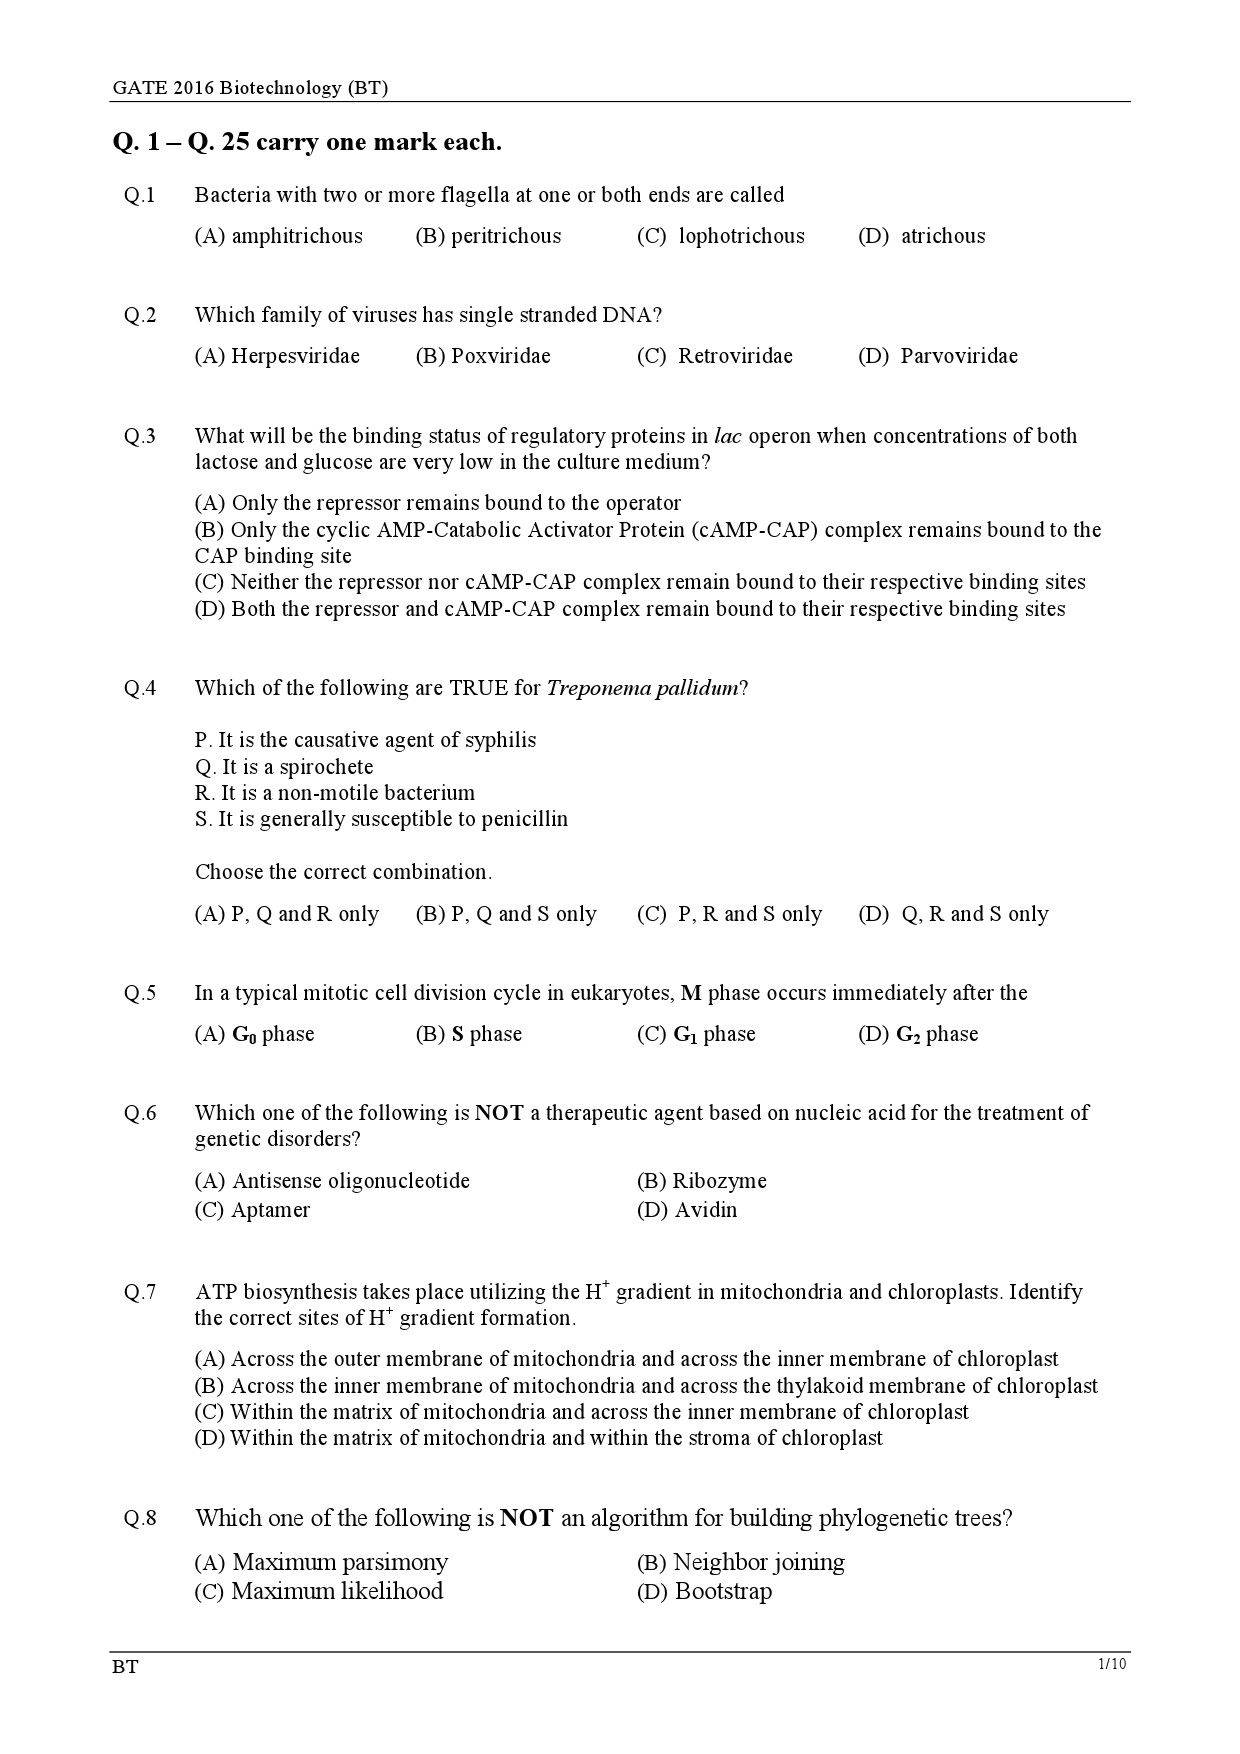 GATE Exam Question Paper 2016 Biotechnology 4